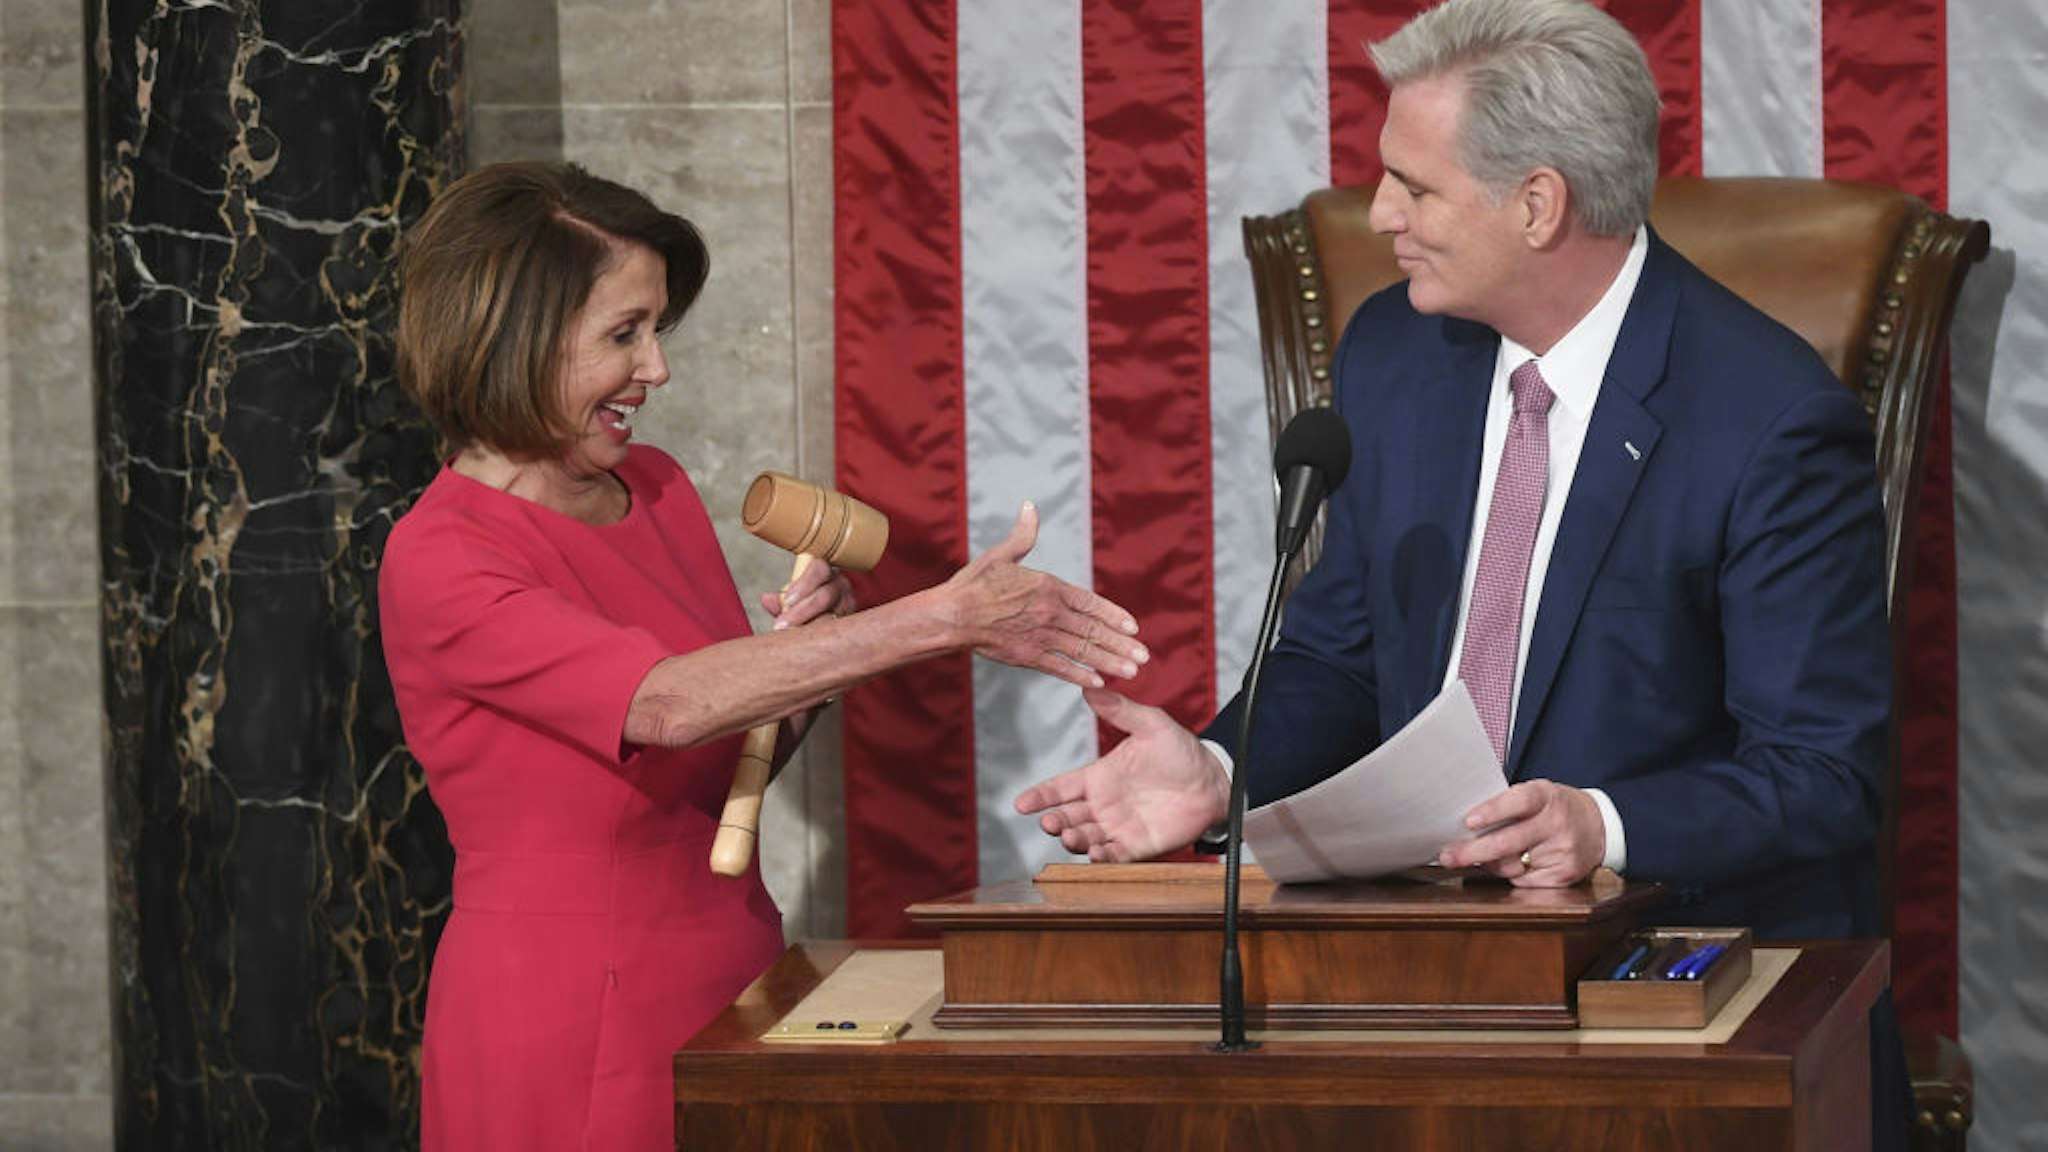 Incoming House Speaker Nancy Pelosi, D-CA, and Rep. Kevin McCarthy Minority Leader shake hands during the opening session of the 116th Congress at the US Capitol in Washington, DC, January 3, 2019. - Veteran Democratic lawmaker Nancy Pelosi was elected speaker of the House Thursday for the second time in her political career, a striking comeback for the only woman ever to hold the post.